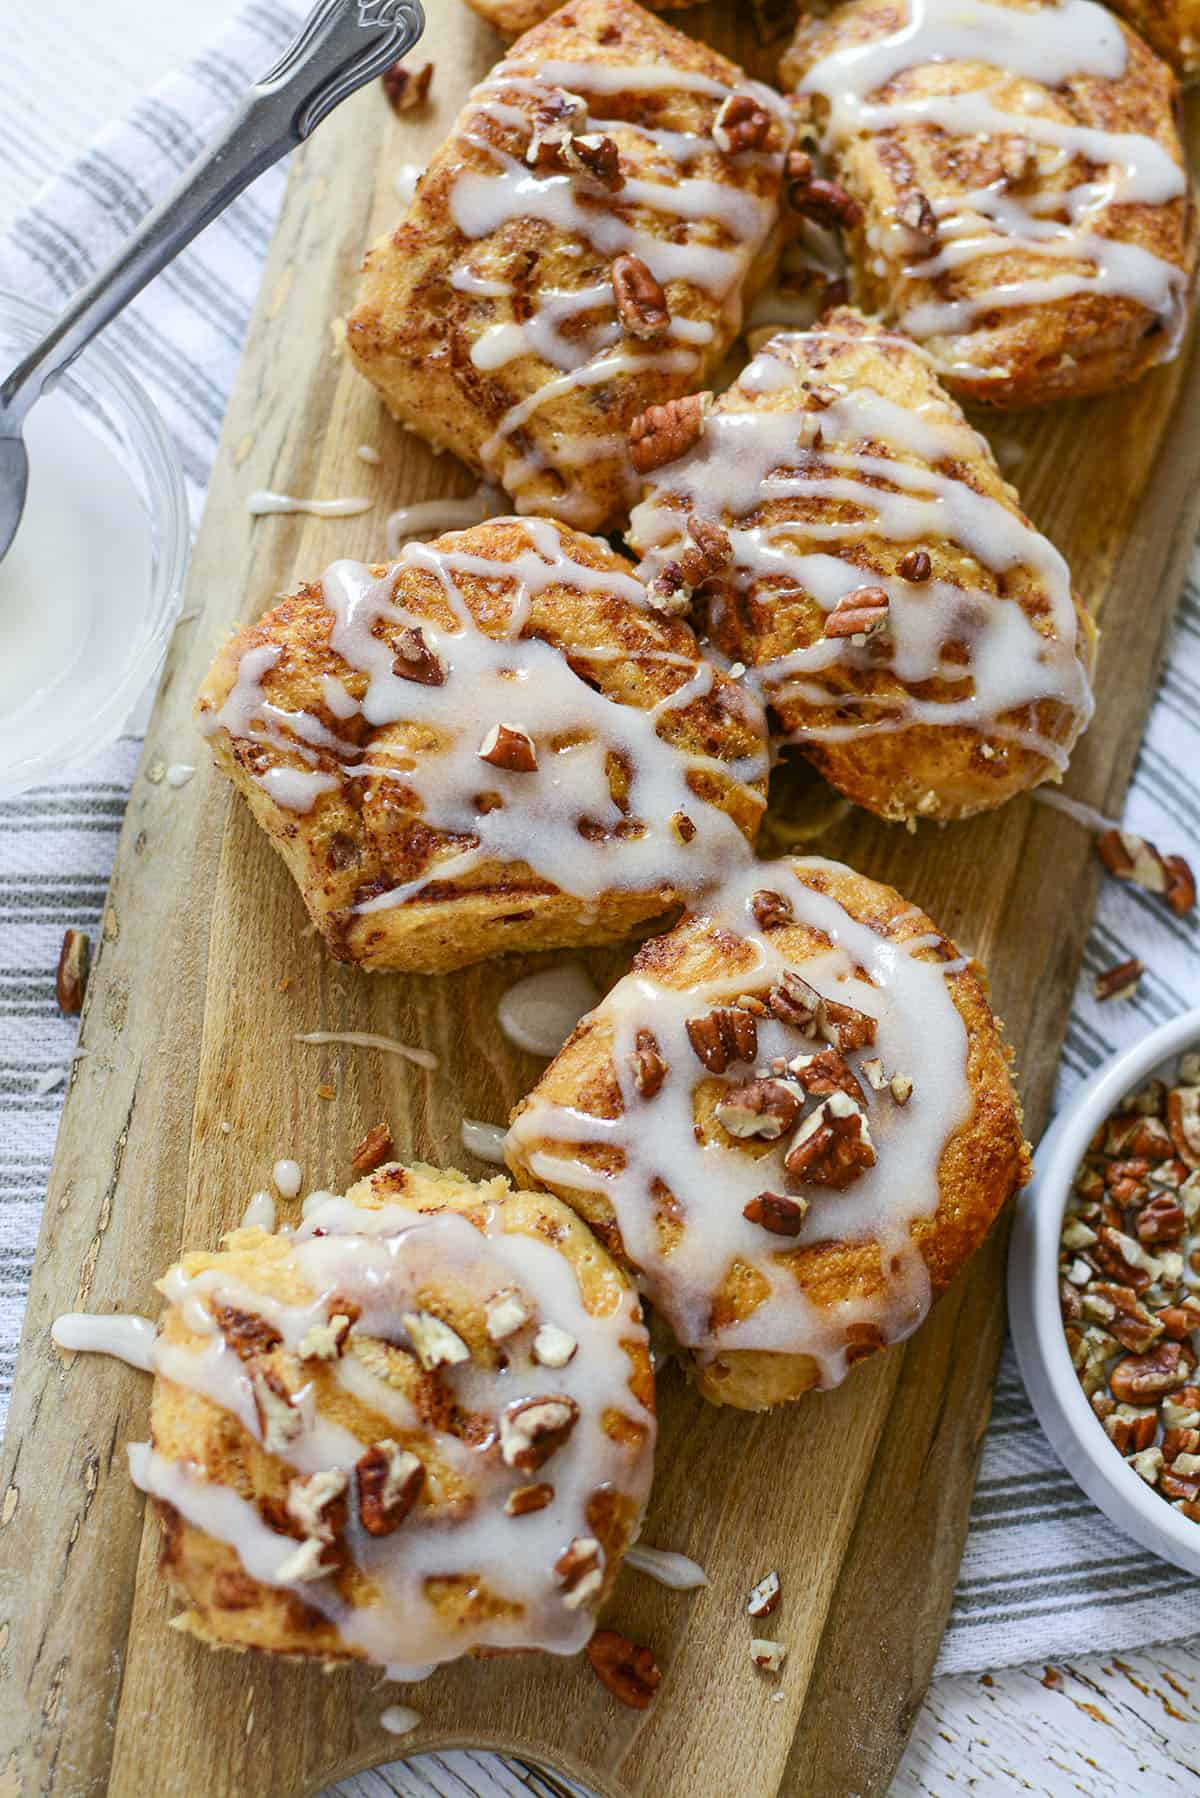 All the tiktok cinnamon rolls recipe are on a board with pecans in a dish on the right.